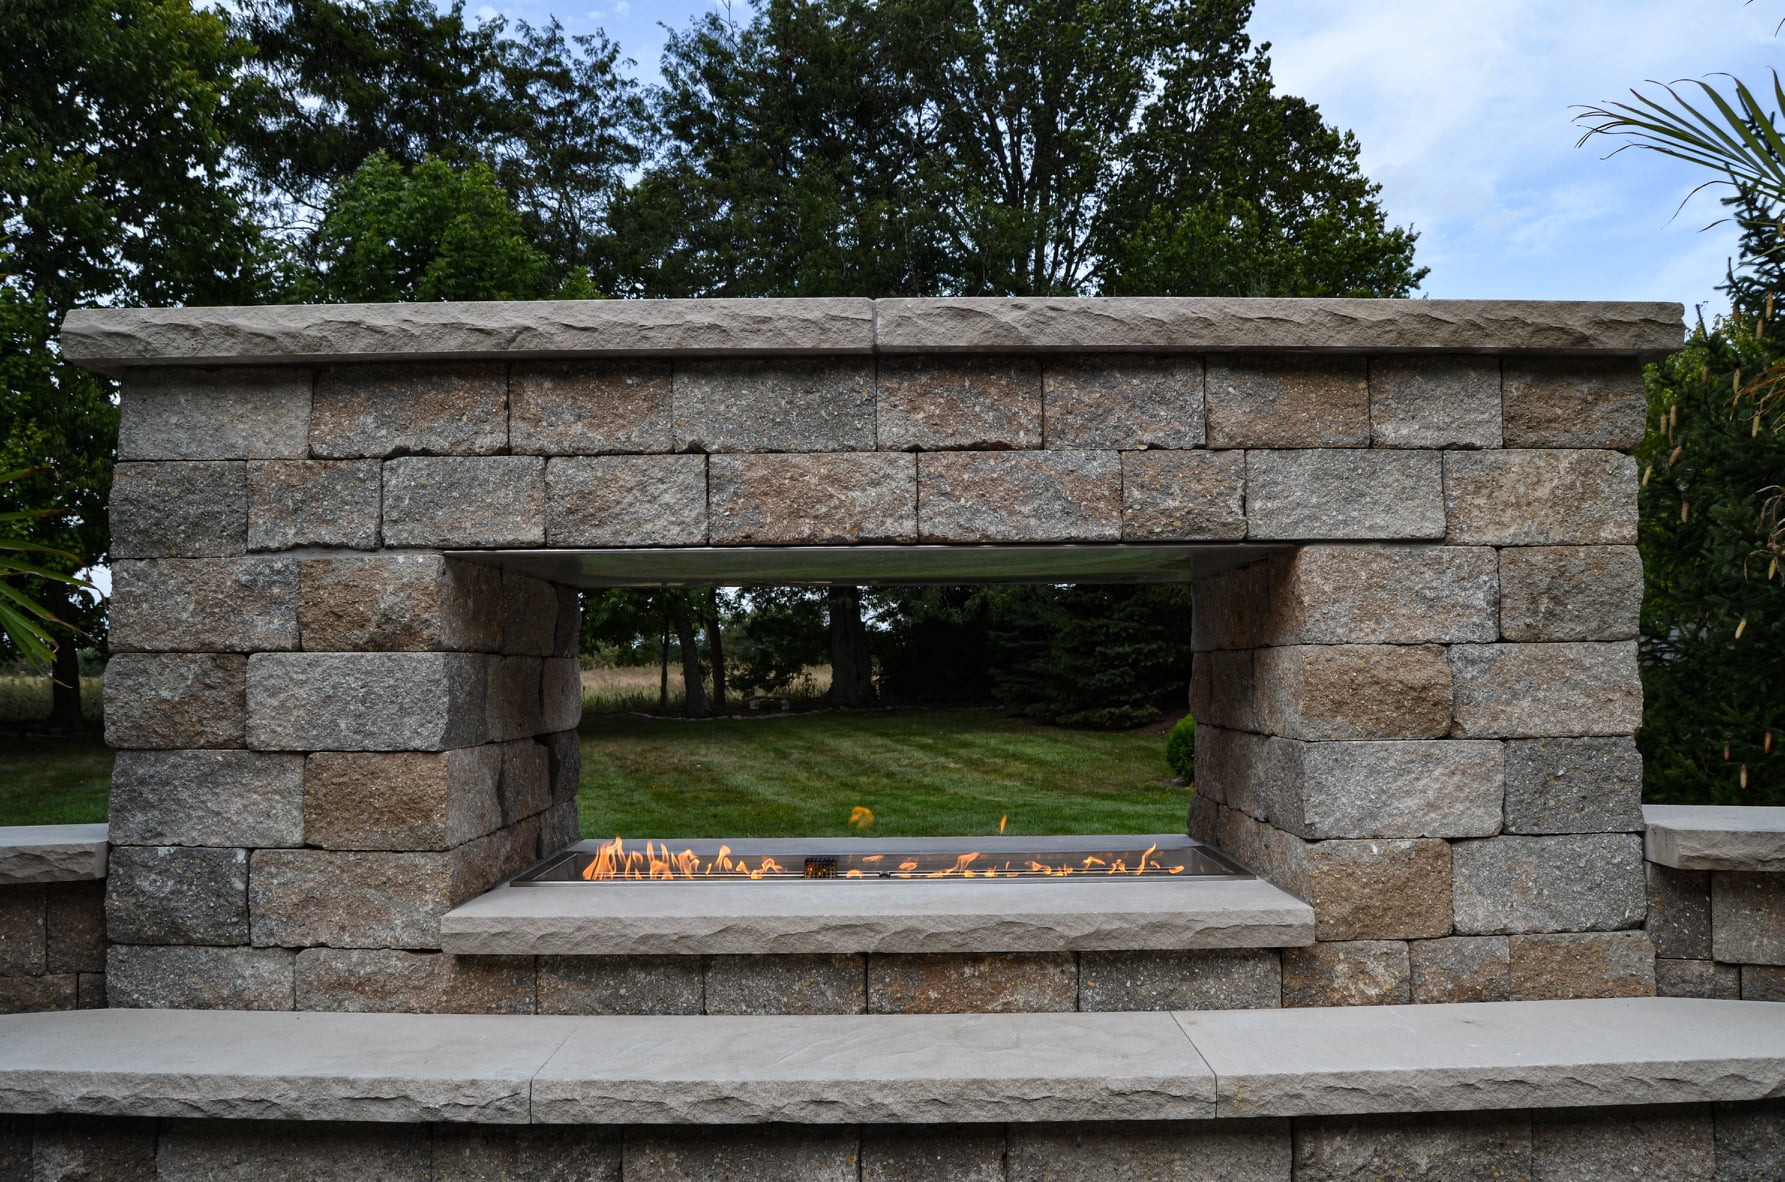 Precision Outdoors Greenwood Fireplace & patio custom paver patio secluded gathering space backyard dual fireplace gathering landscaping, mulching, straw and seed placement seeding unilock materials Greenwood indiana dream space